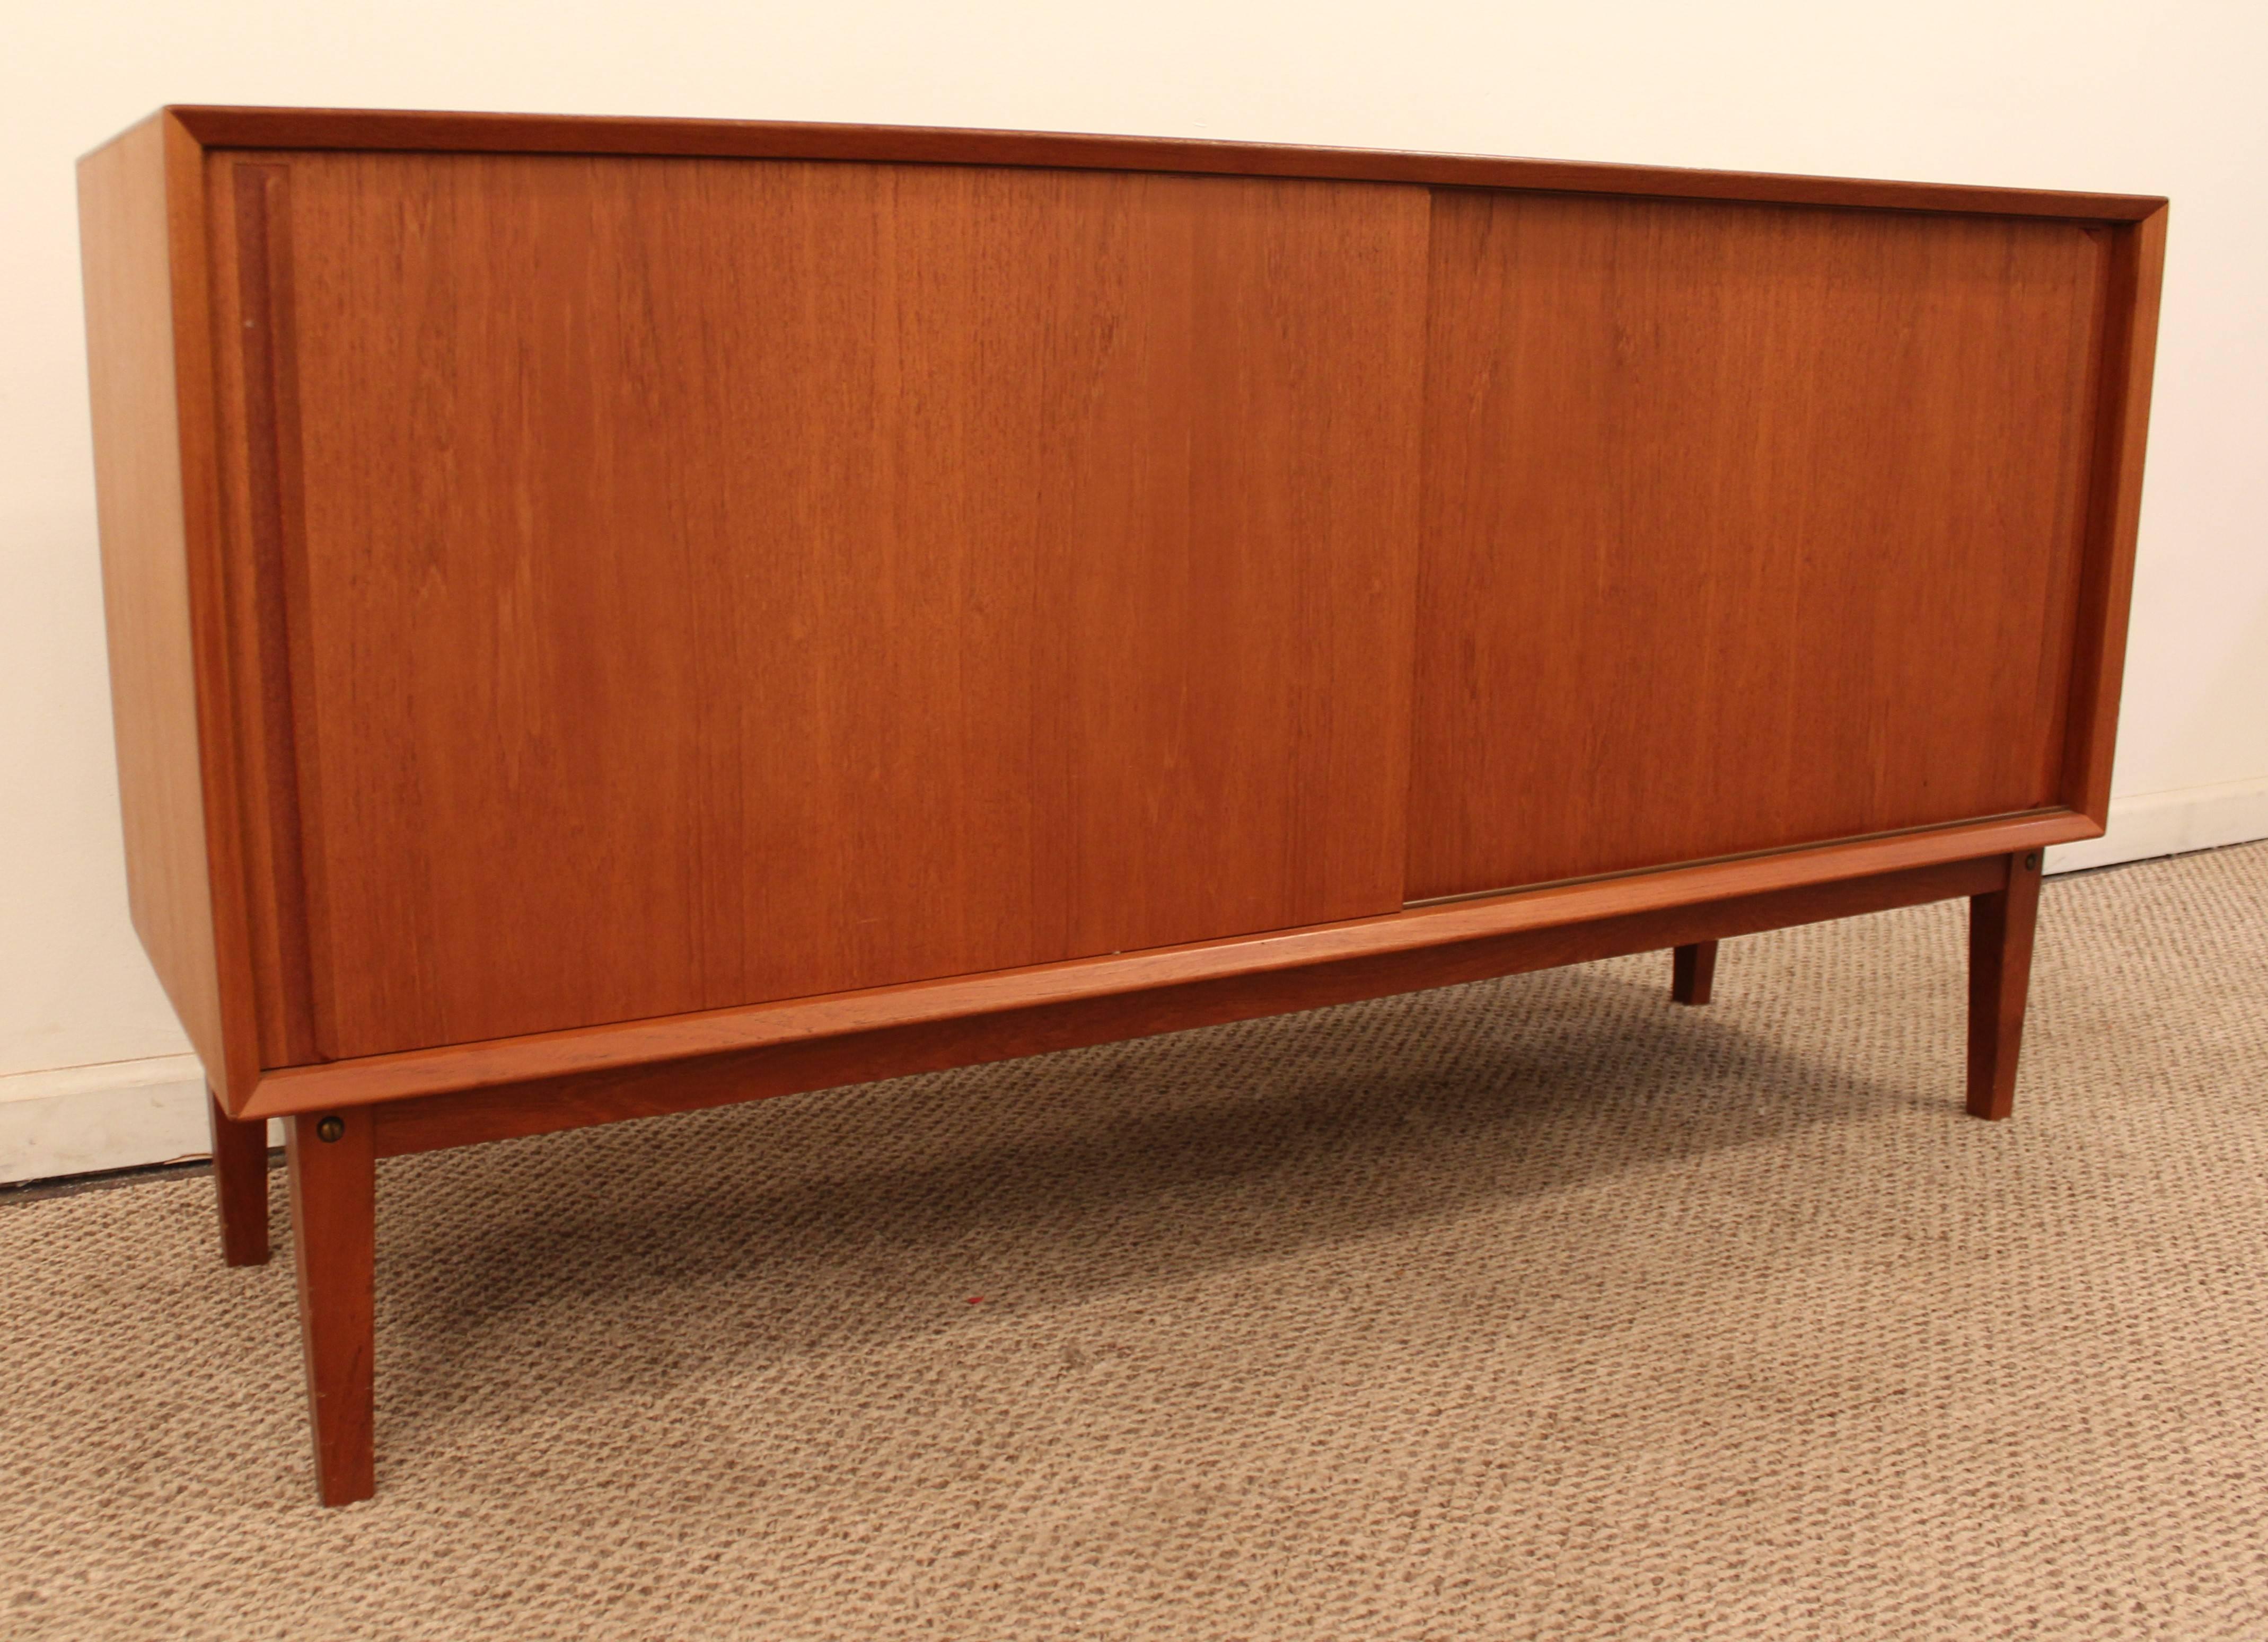 Offered is a 2-piece teak credenza (top comes off base), featuring sliding doors with shelving and drawers inside, and a floating base. 